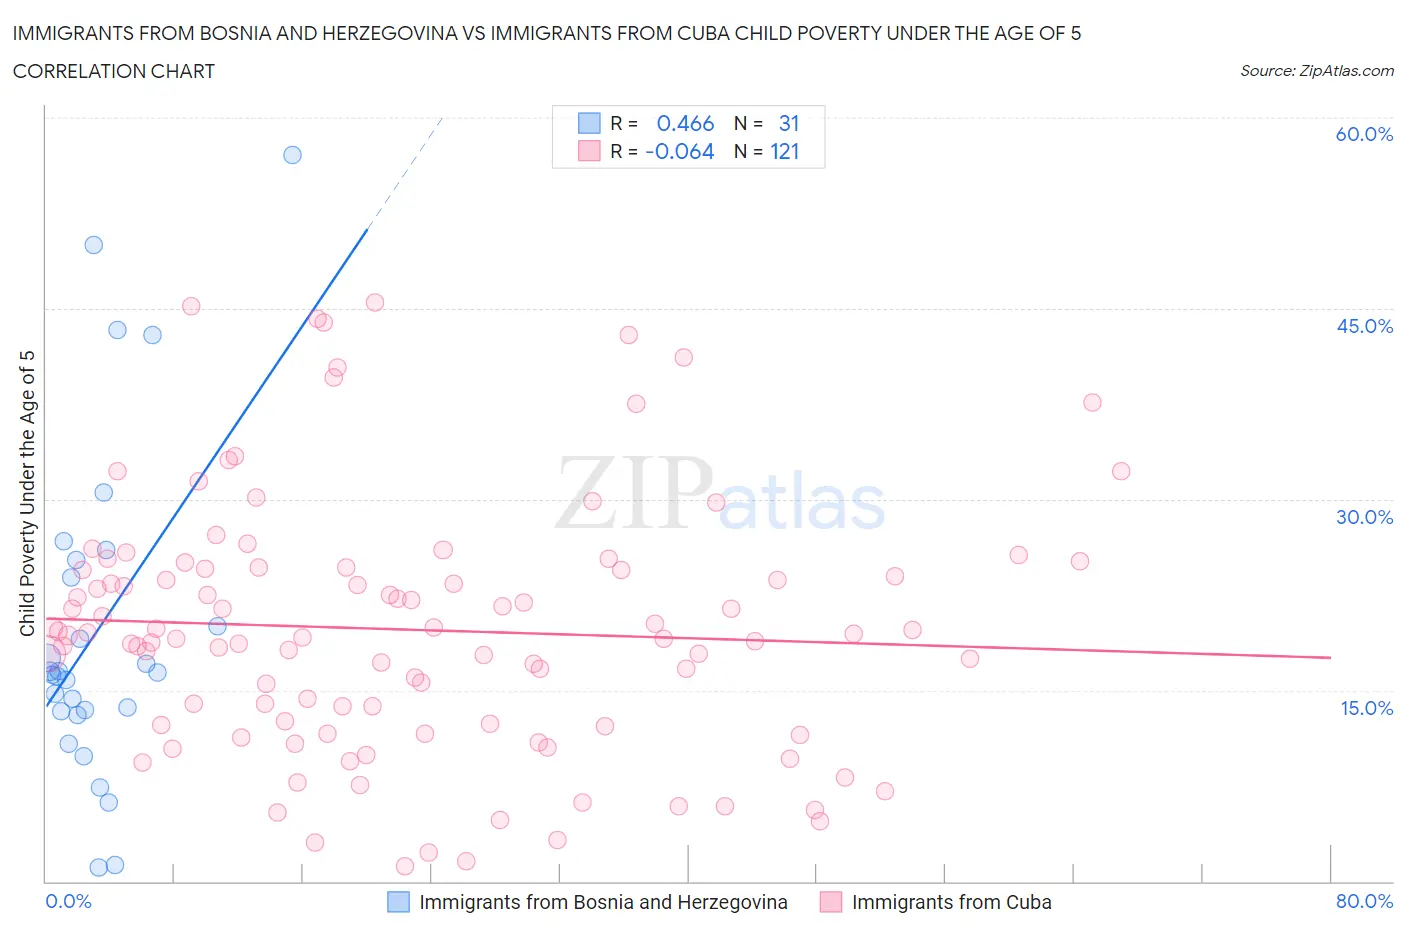 Immigrants from Bosnia and Herzegovina vs Immigrants from Cuba Child Poverty Under the Age of 5